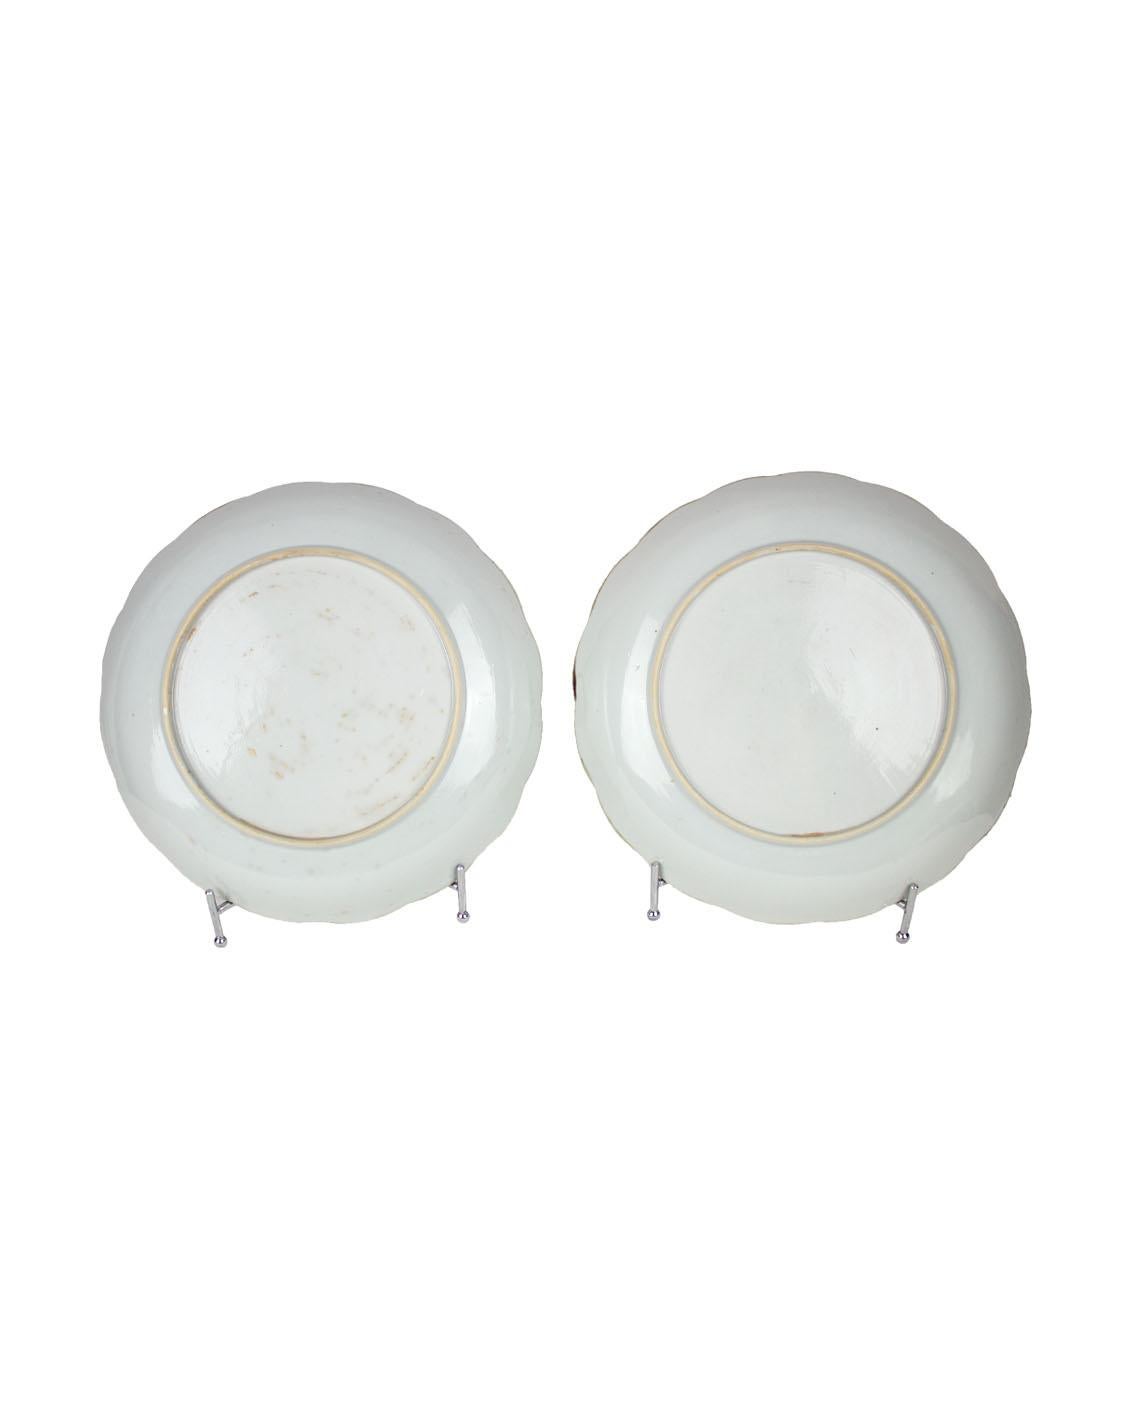 Chinese Export Porcelain Pair of Saucers, Qianlong, 1736-1795 For Sale 6